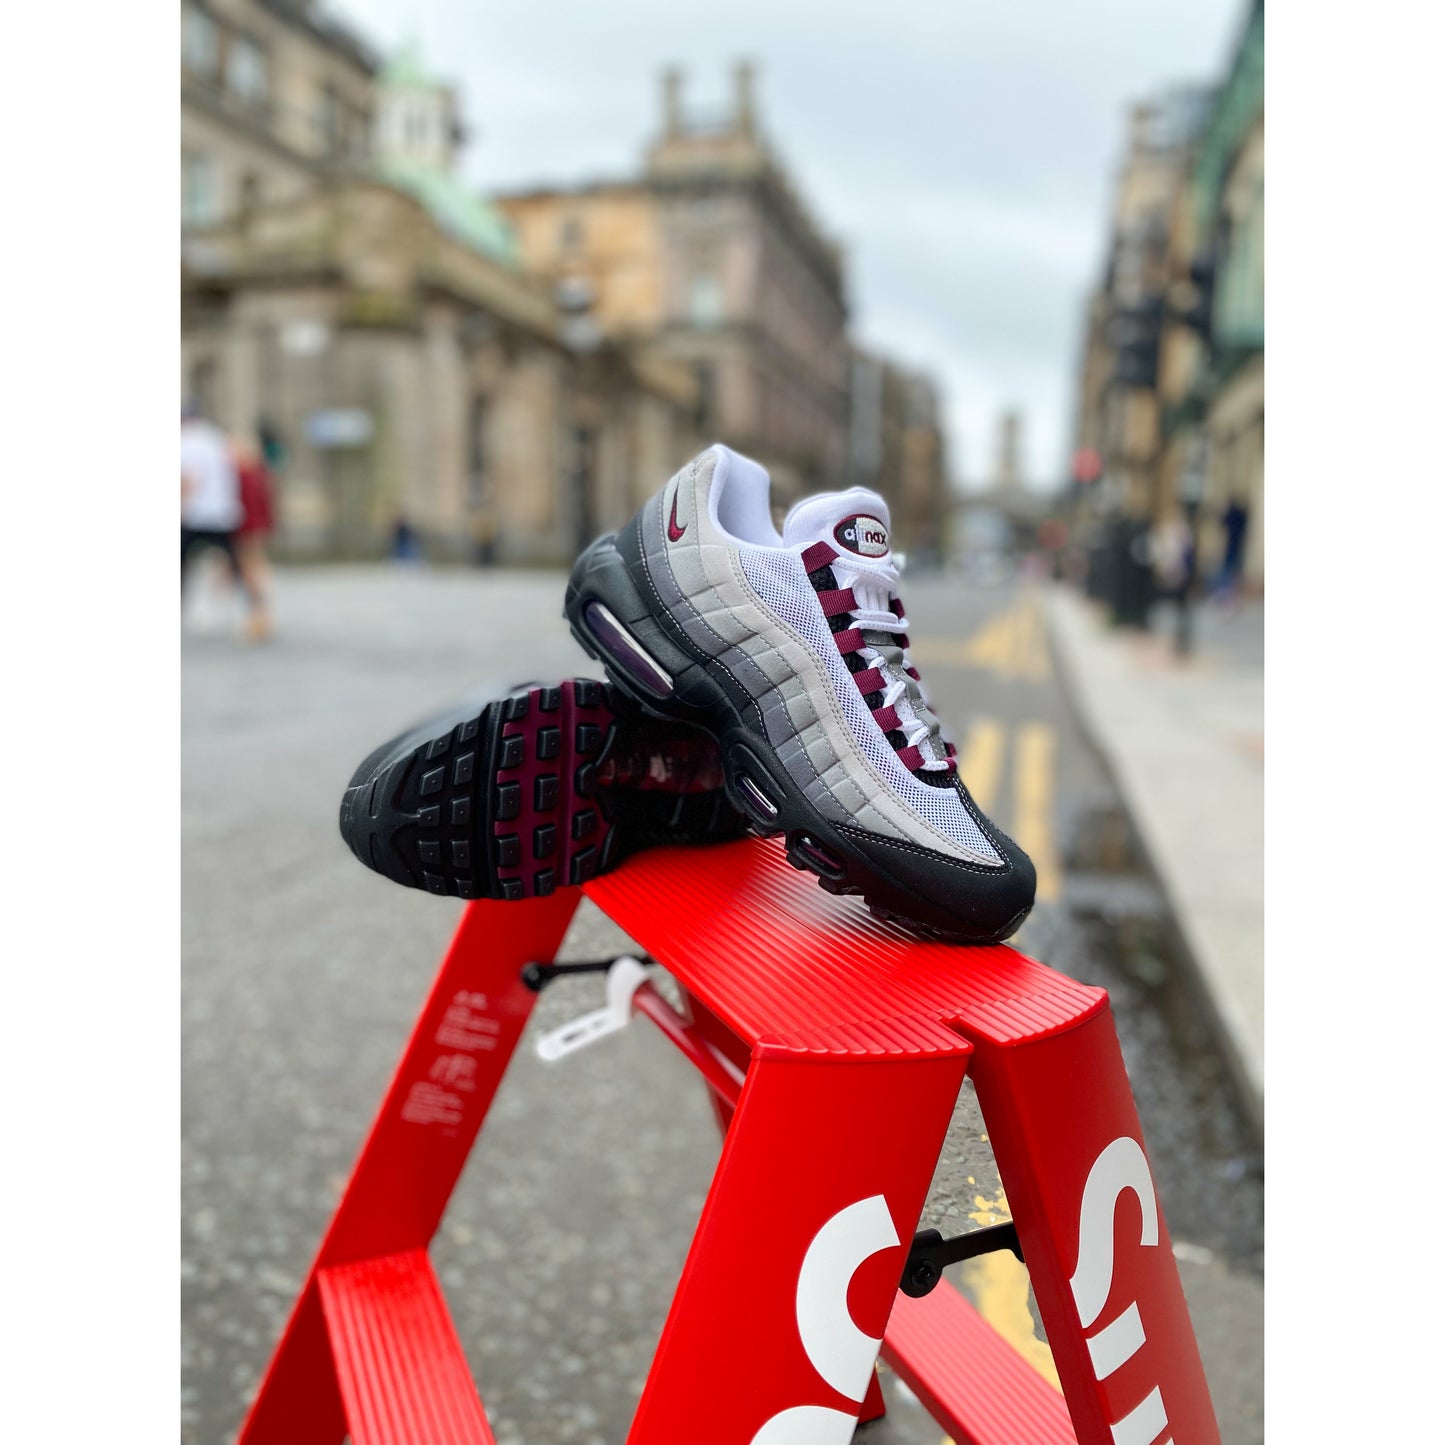 Nike Air Max 95 OG Solar Red size 5y